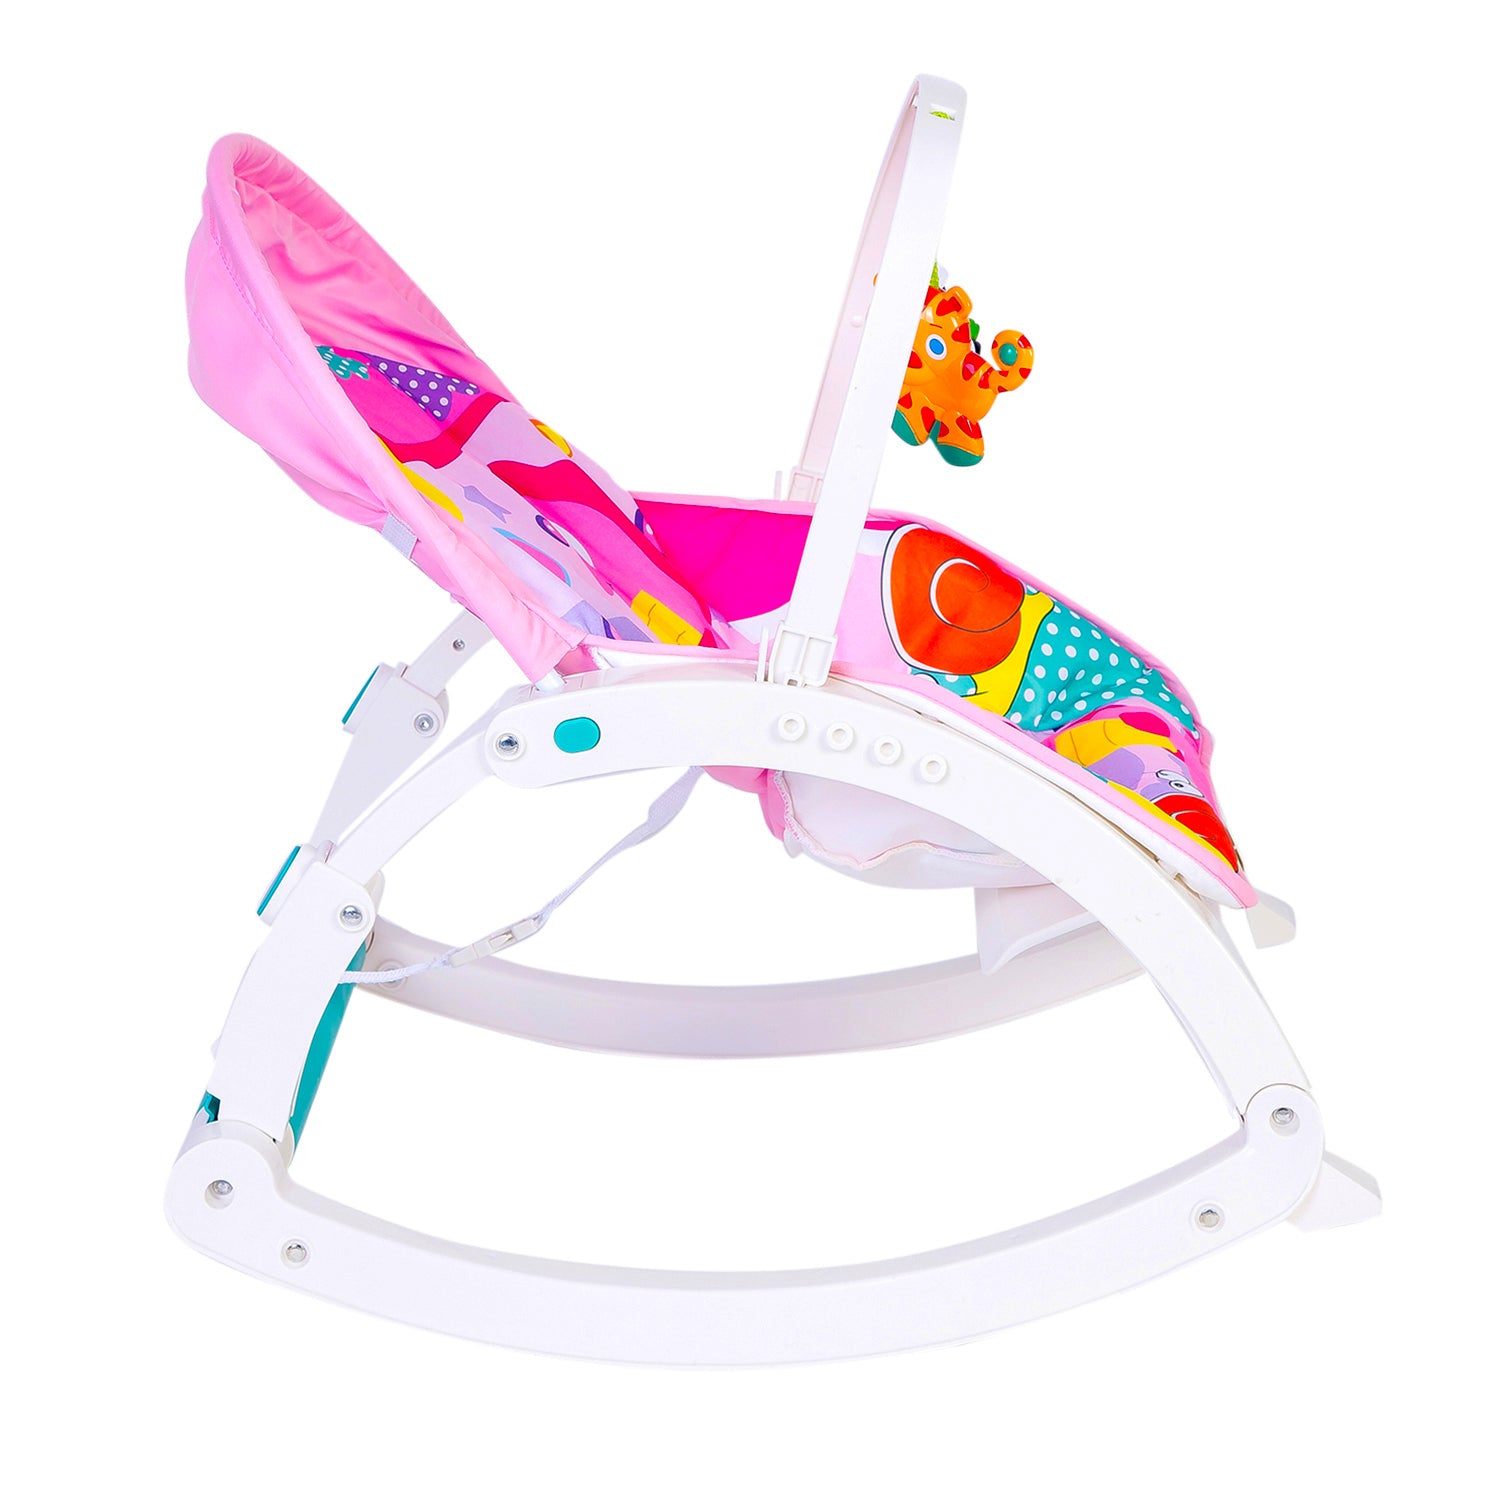 New Born To 18 Kg Baby Portable Rocker Pink - Baby Moo